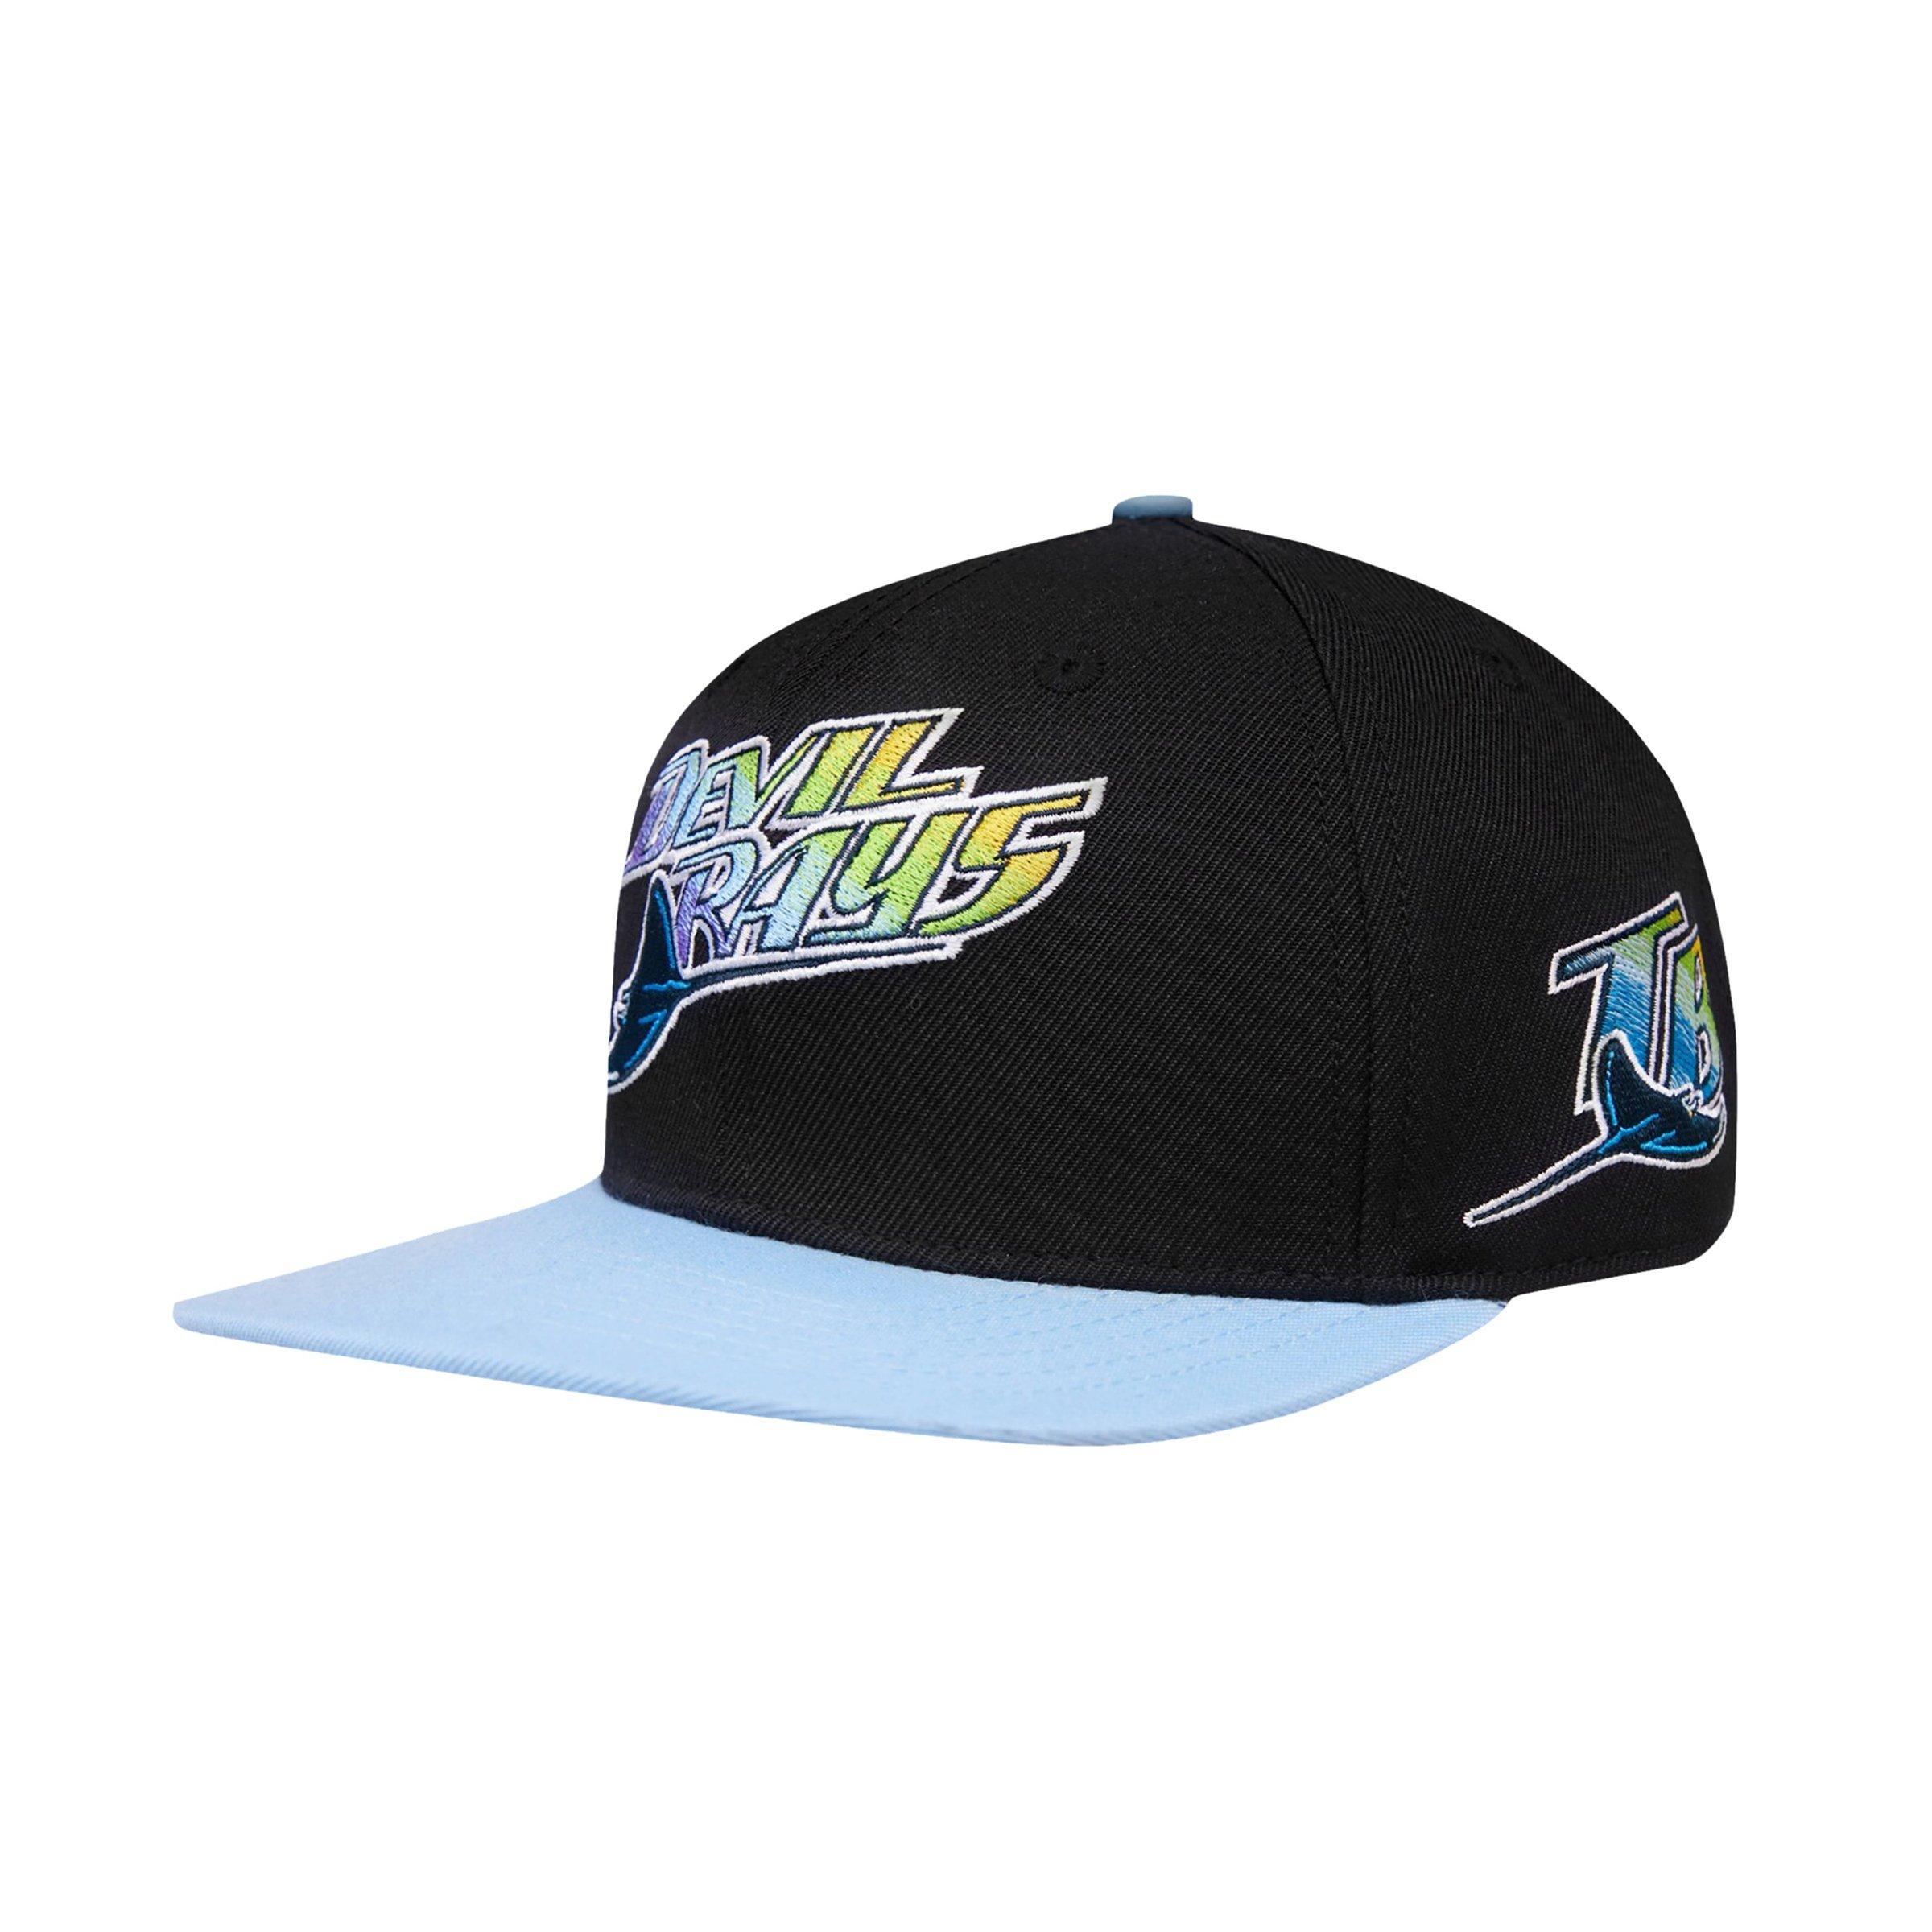 Vintage/Retro Tampa Bay Devil Rays Snapback, Men's Fashion, Watches &  Accessories, Caps & Hats on Carousell